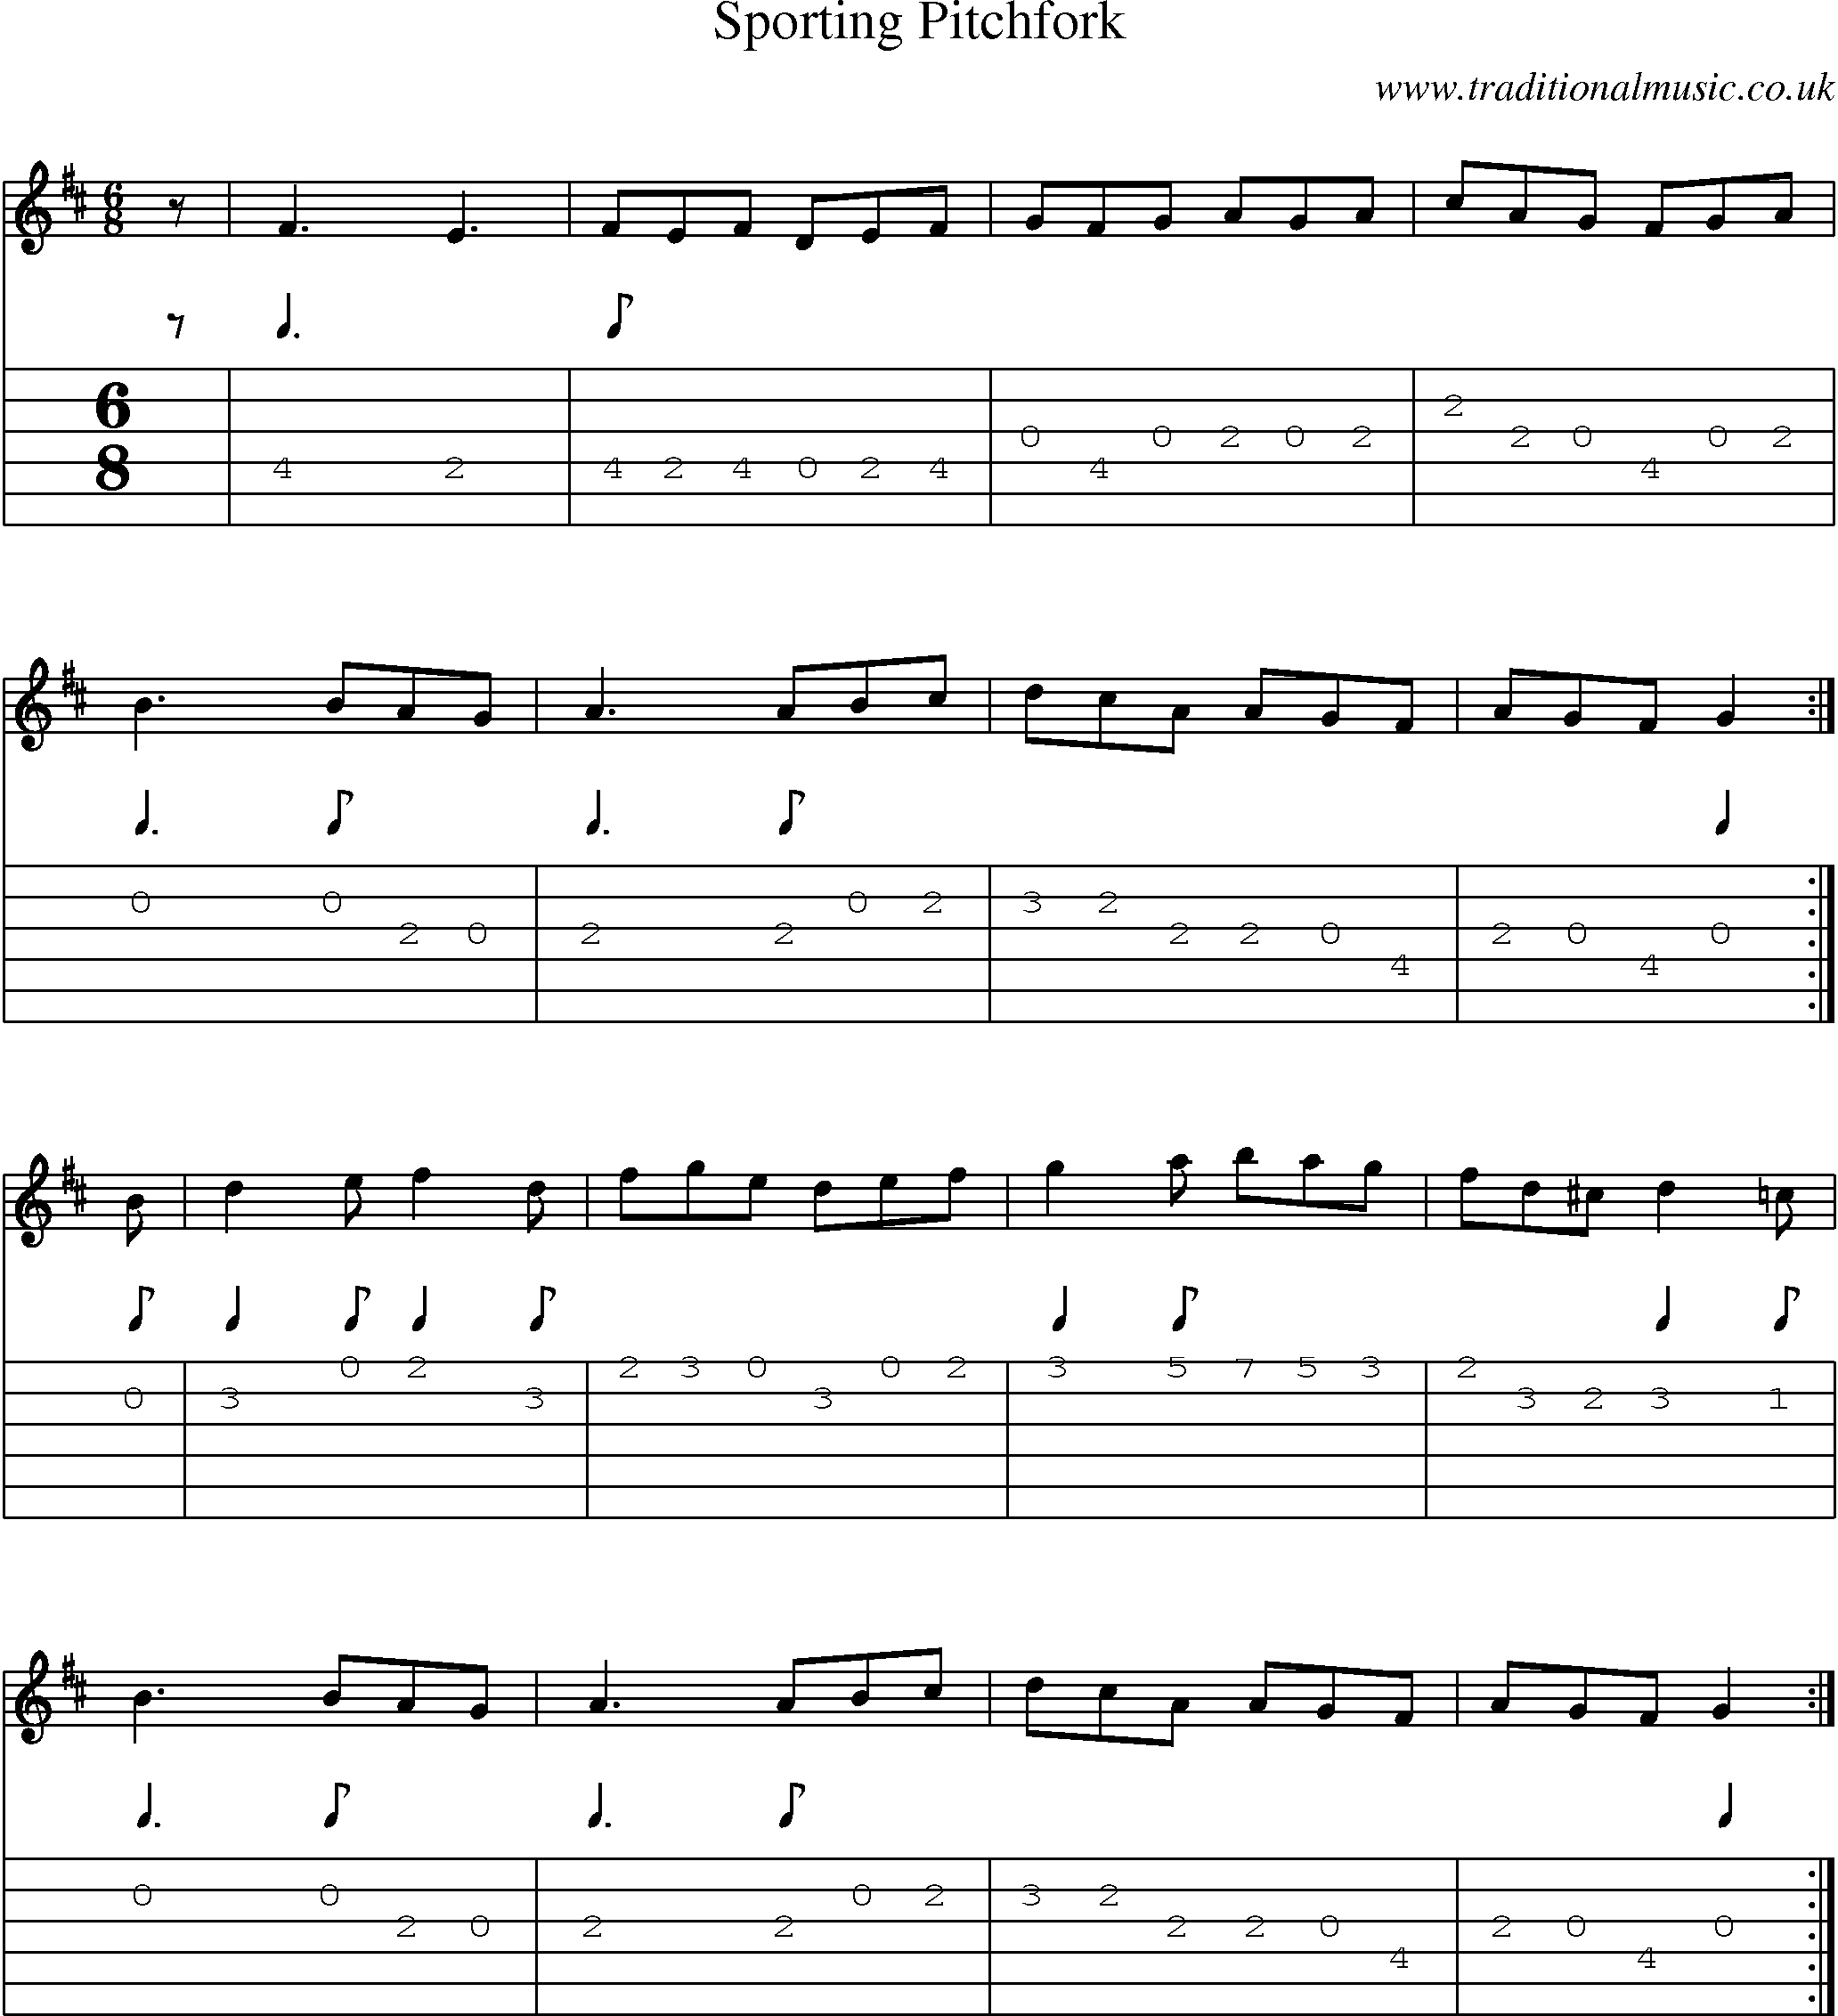 Music Score and Guitar Tabs for Sporting Pitchfork